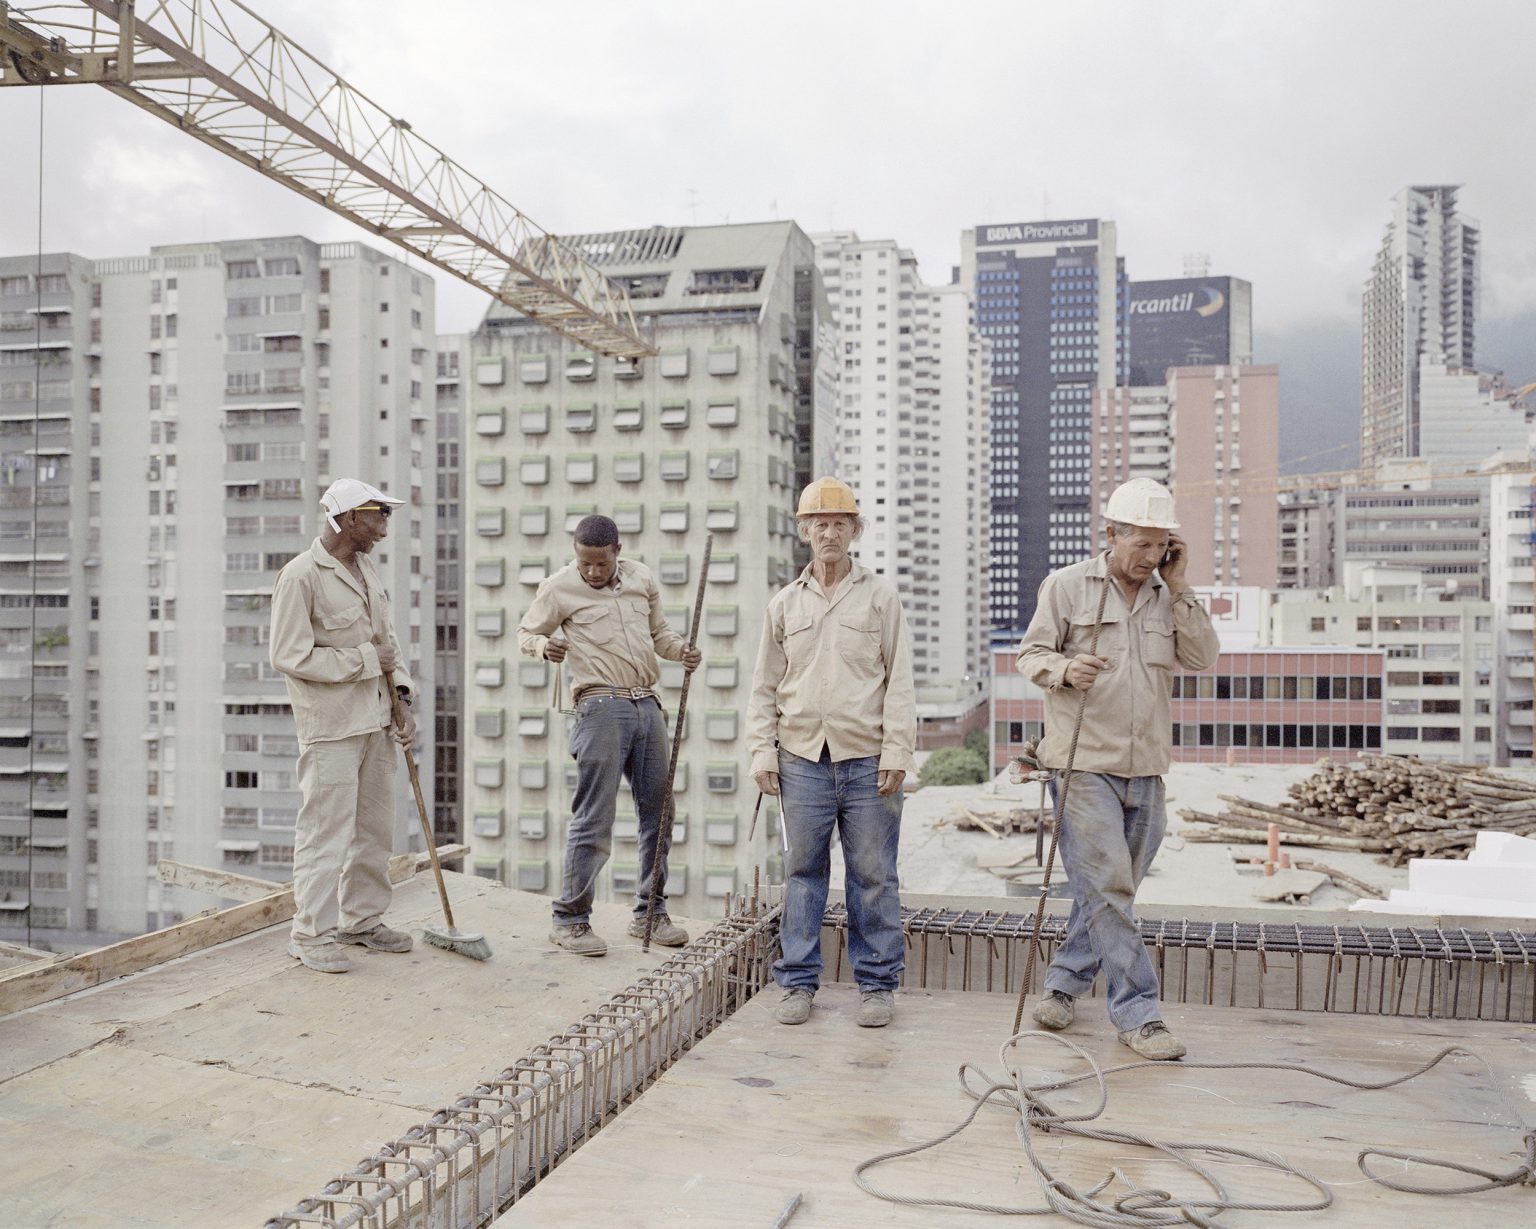 Some workers on the roof of a contruction site in Caracas. The building is part of the program "Mission Vivienda" to give houses to the poorest part of the population.